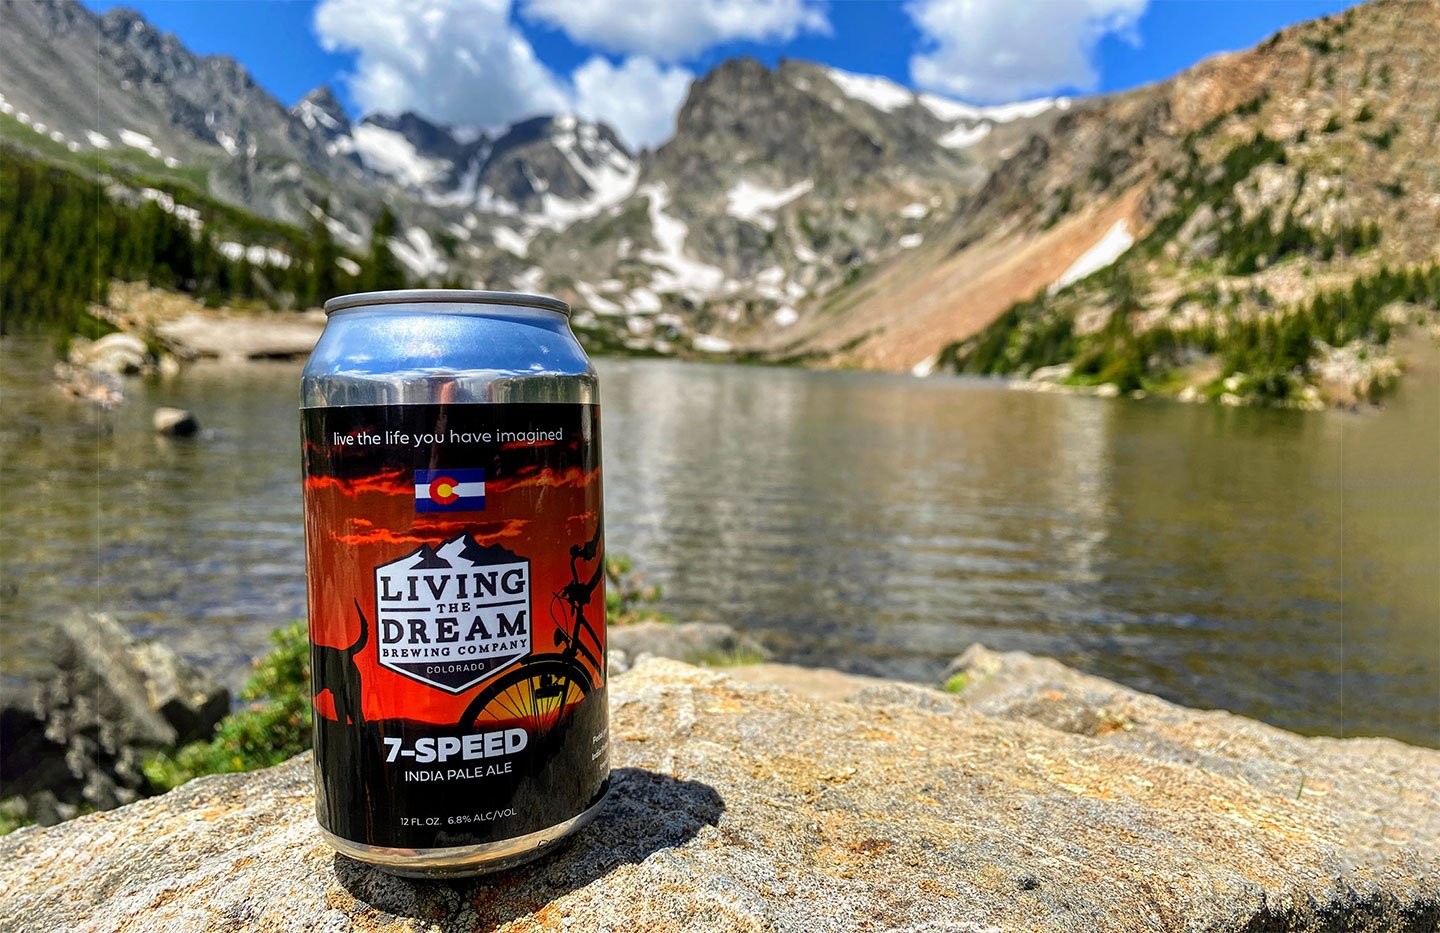 Can of 7-Speed IPA beer sitting on rock near edge of water with Colorado mountains in the back